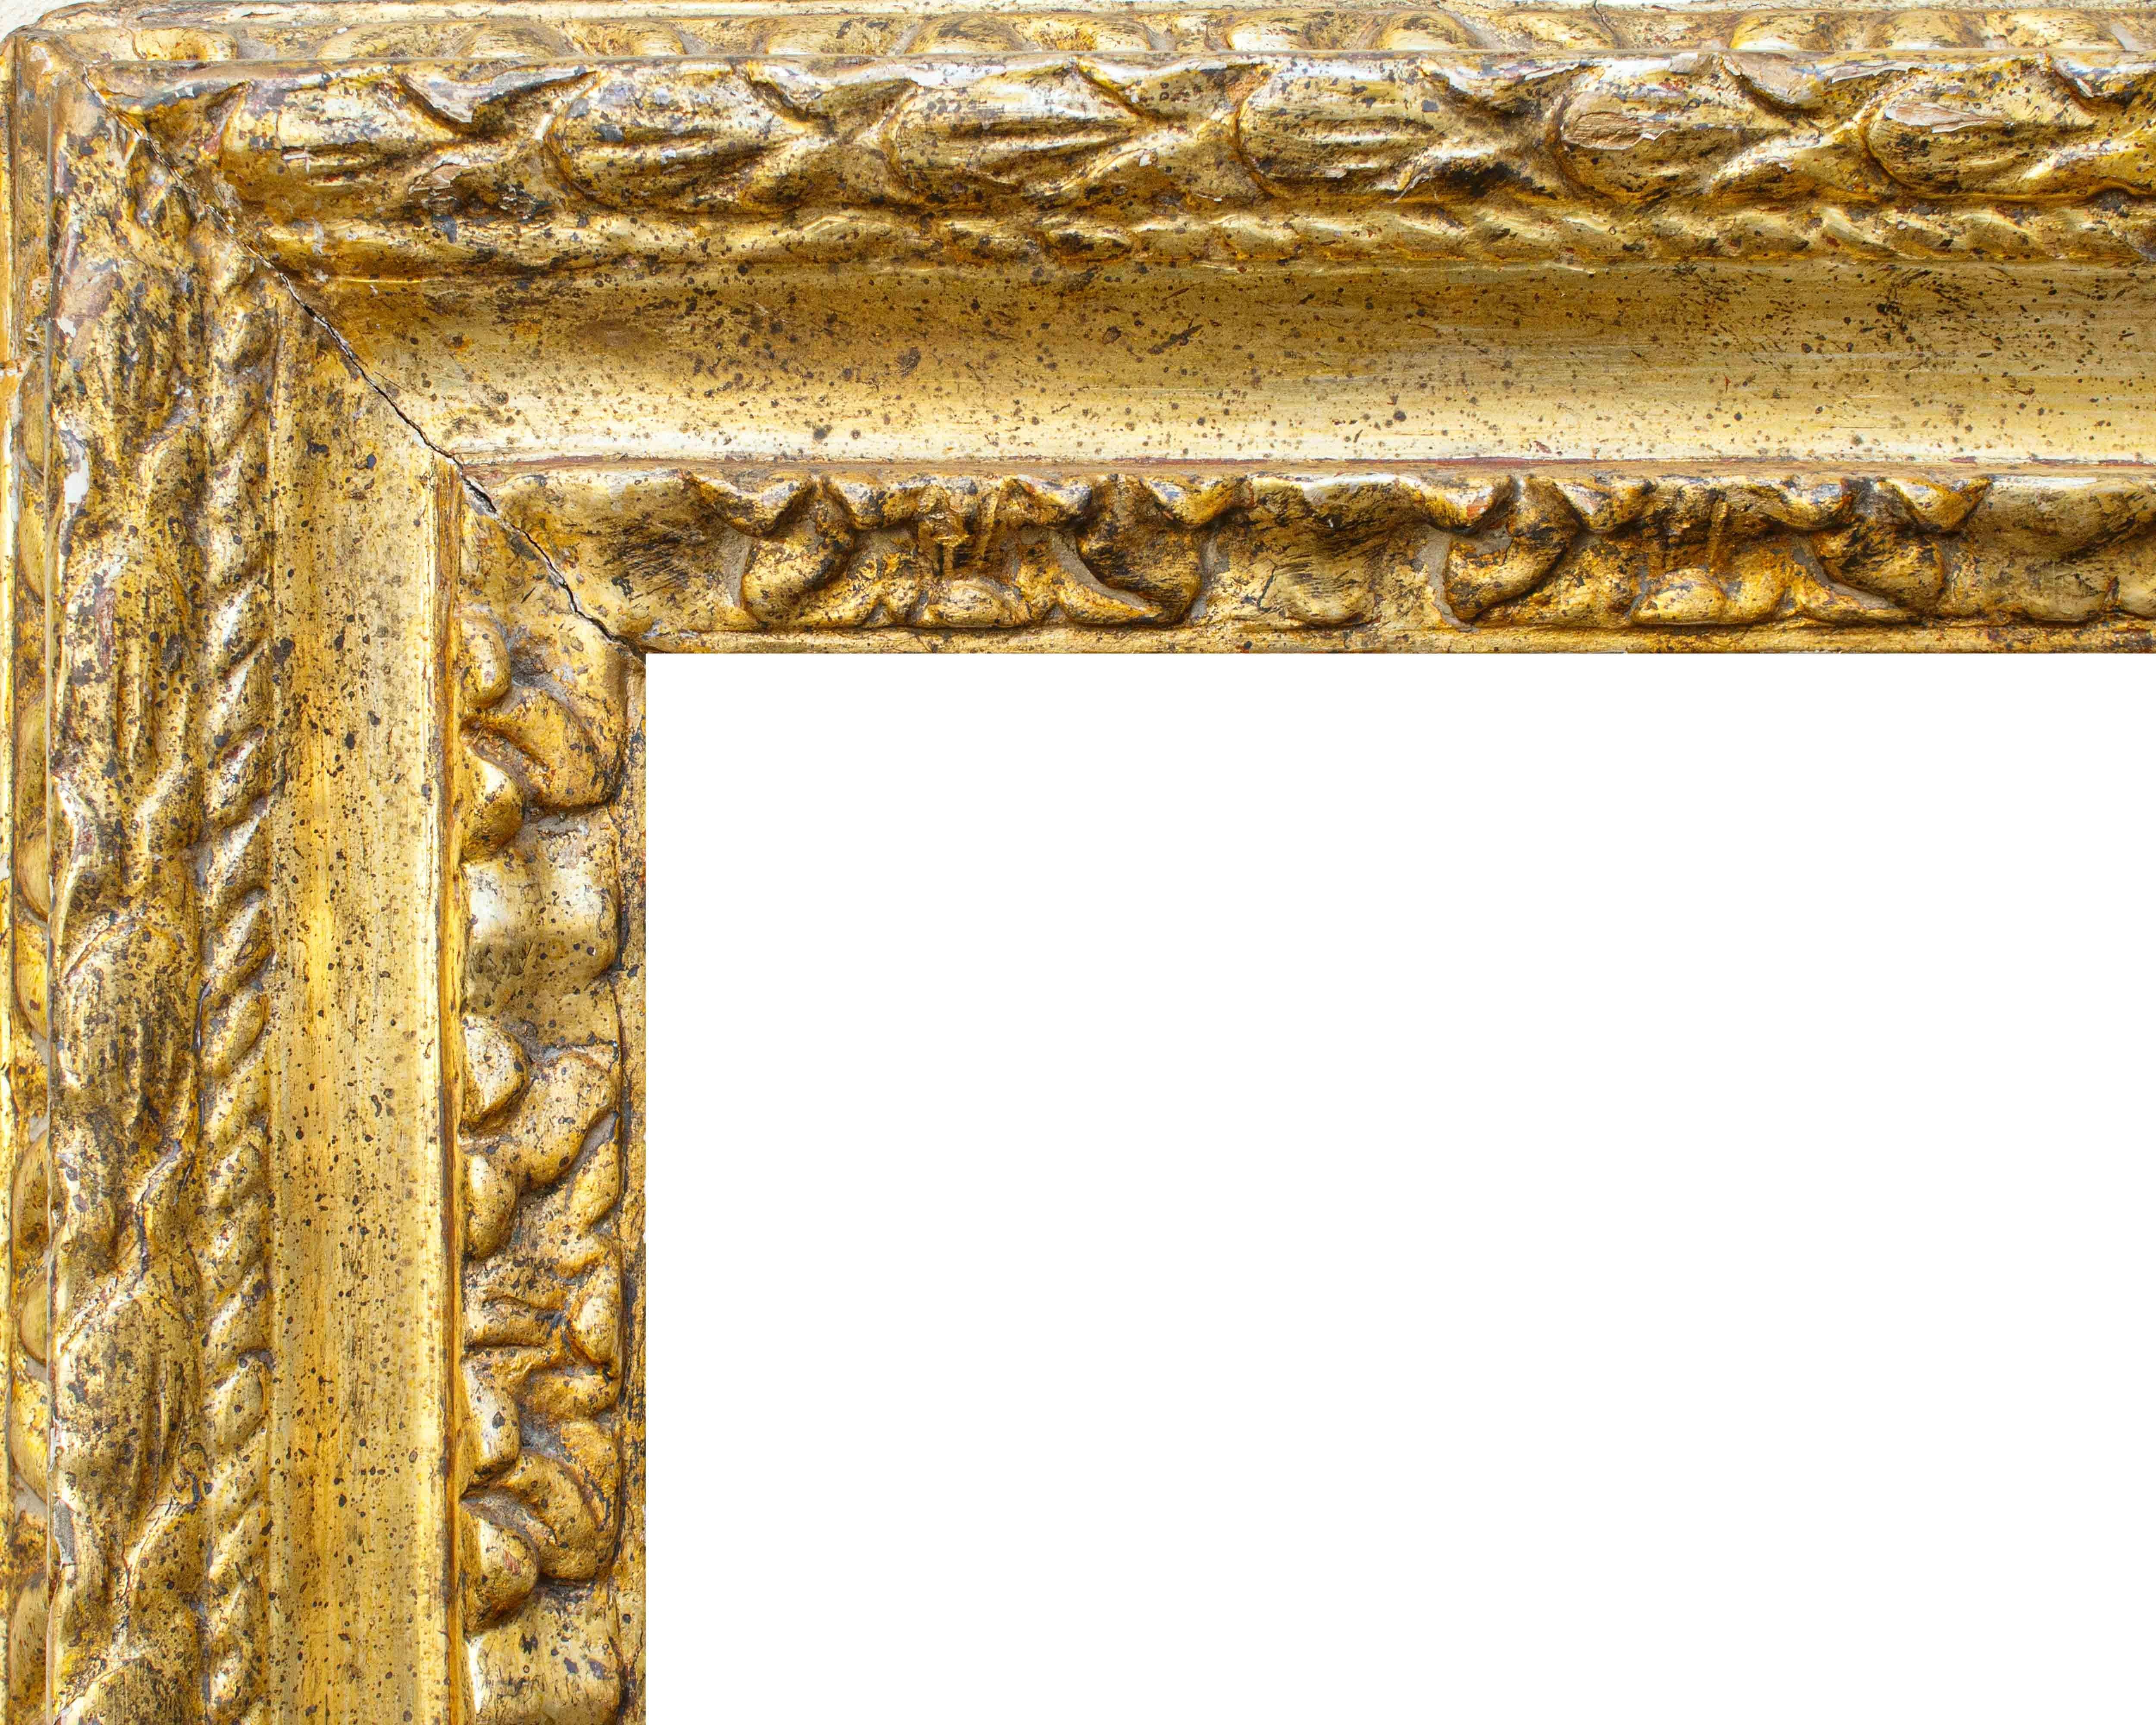 17th century, central Italy

Frame

Carved and gilded mecca wood, 67 x 92 cm

Light 45 x 71

The frame in question is gilded mecca wood, carved with leaf decorations on two orders interspersed with a smooth throat and ribbon. 

Mecca